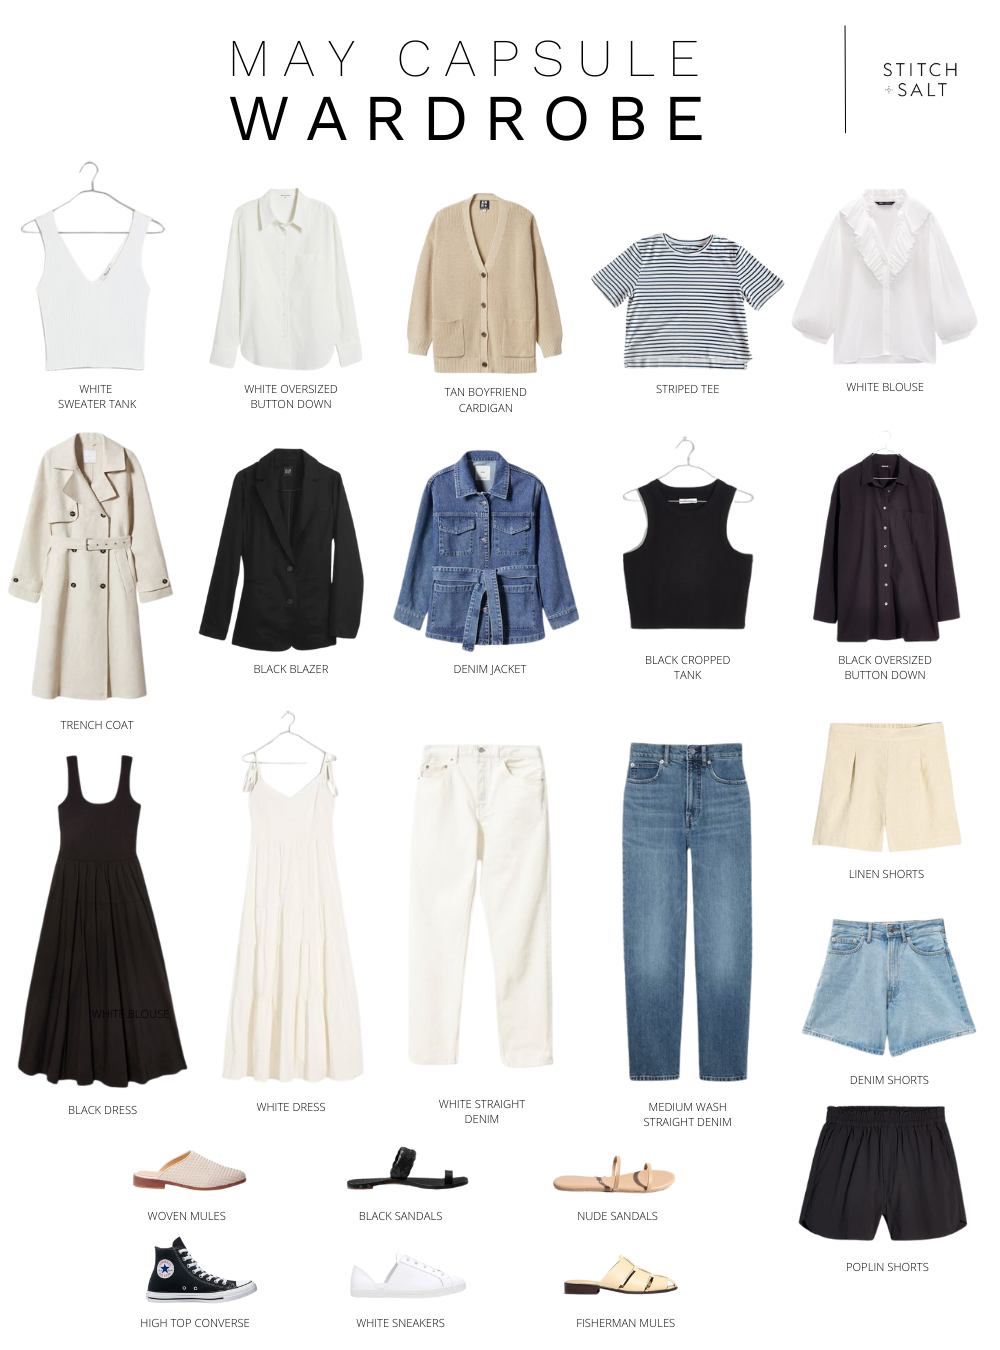 20 Classic Petite Outfit Ideas - Spring Summer Capsule Wardrobe